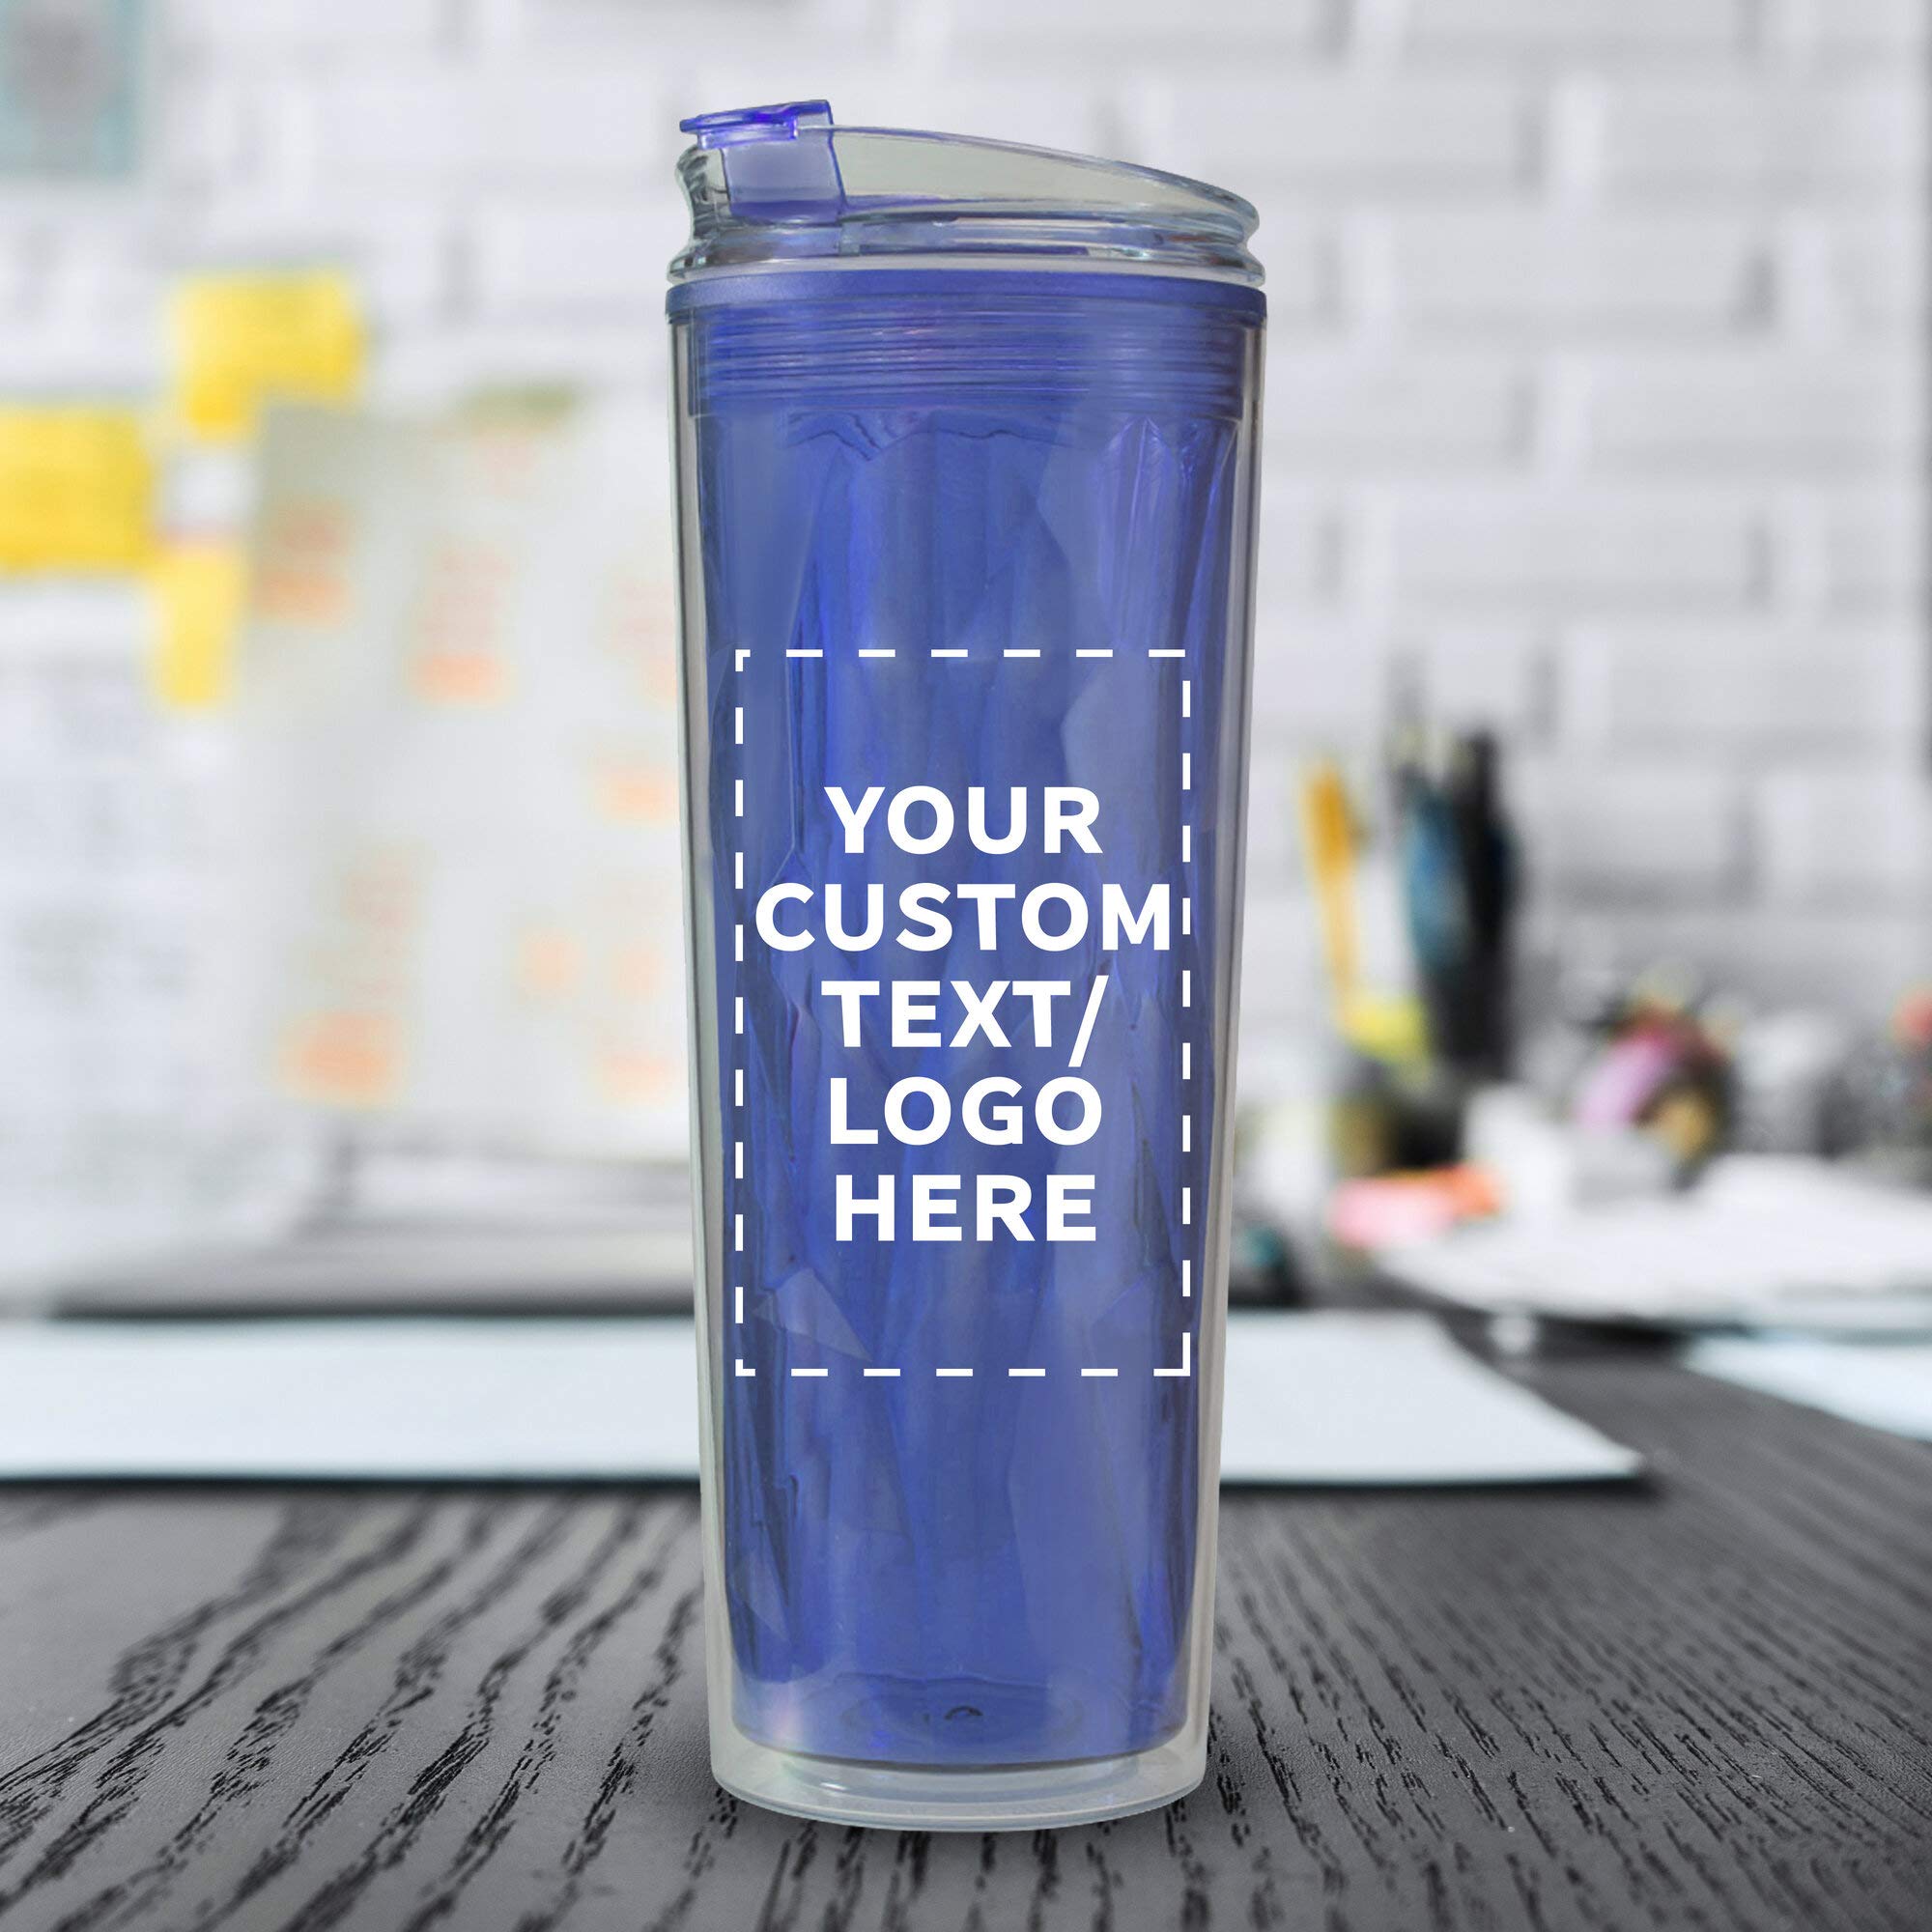 Personalized 20 oz. Double Wall Plastic Travel Mugs - 10 Pack - Custom Text, Logo - Blue